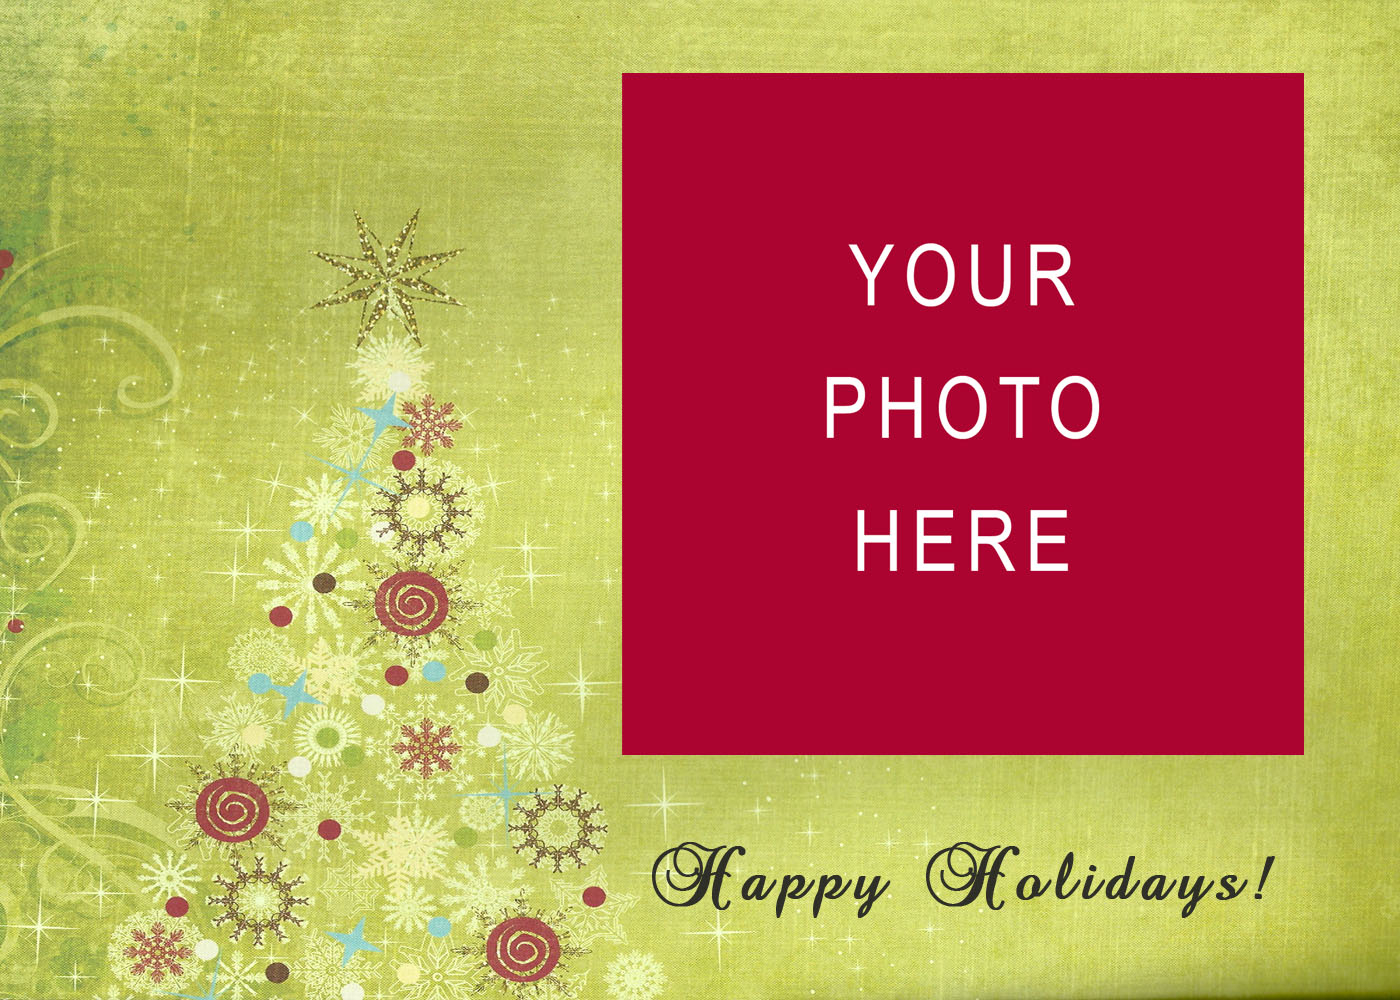 11 Christmas Card Templates Free Download Images – Christmas Pertaining To Christmas Photo Cards Templates Free Downloads